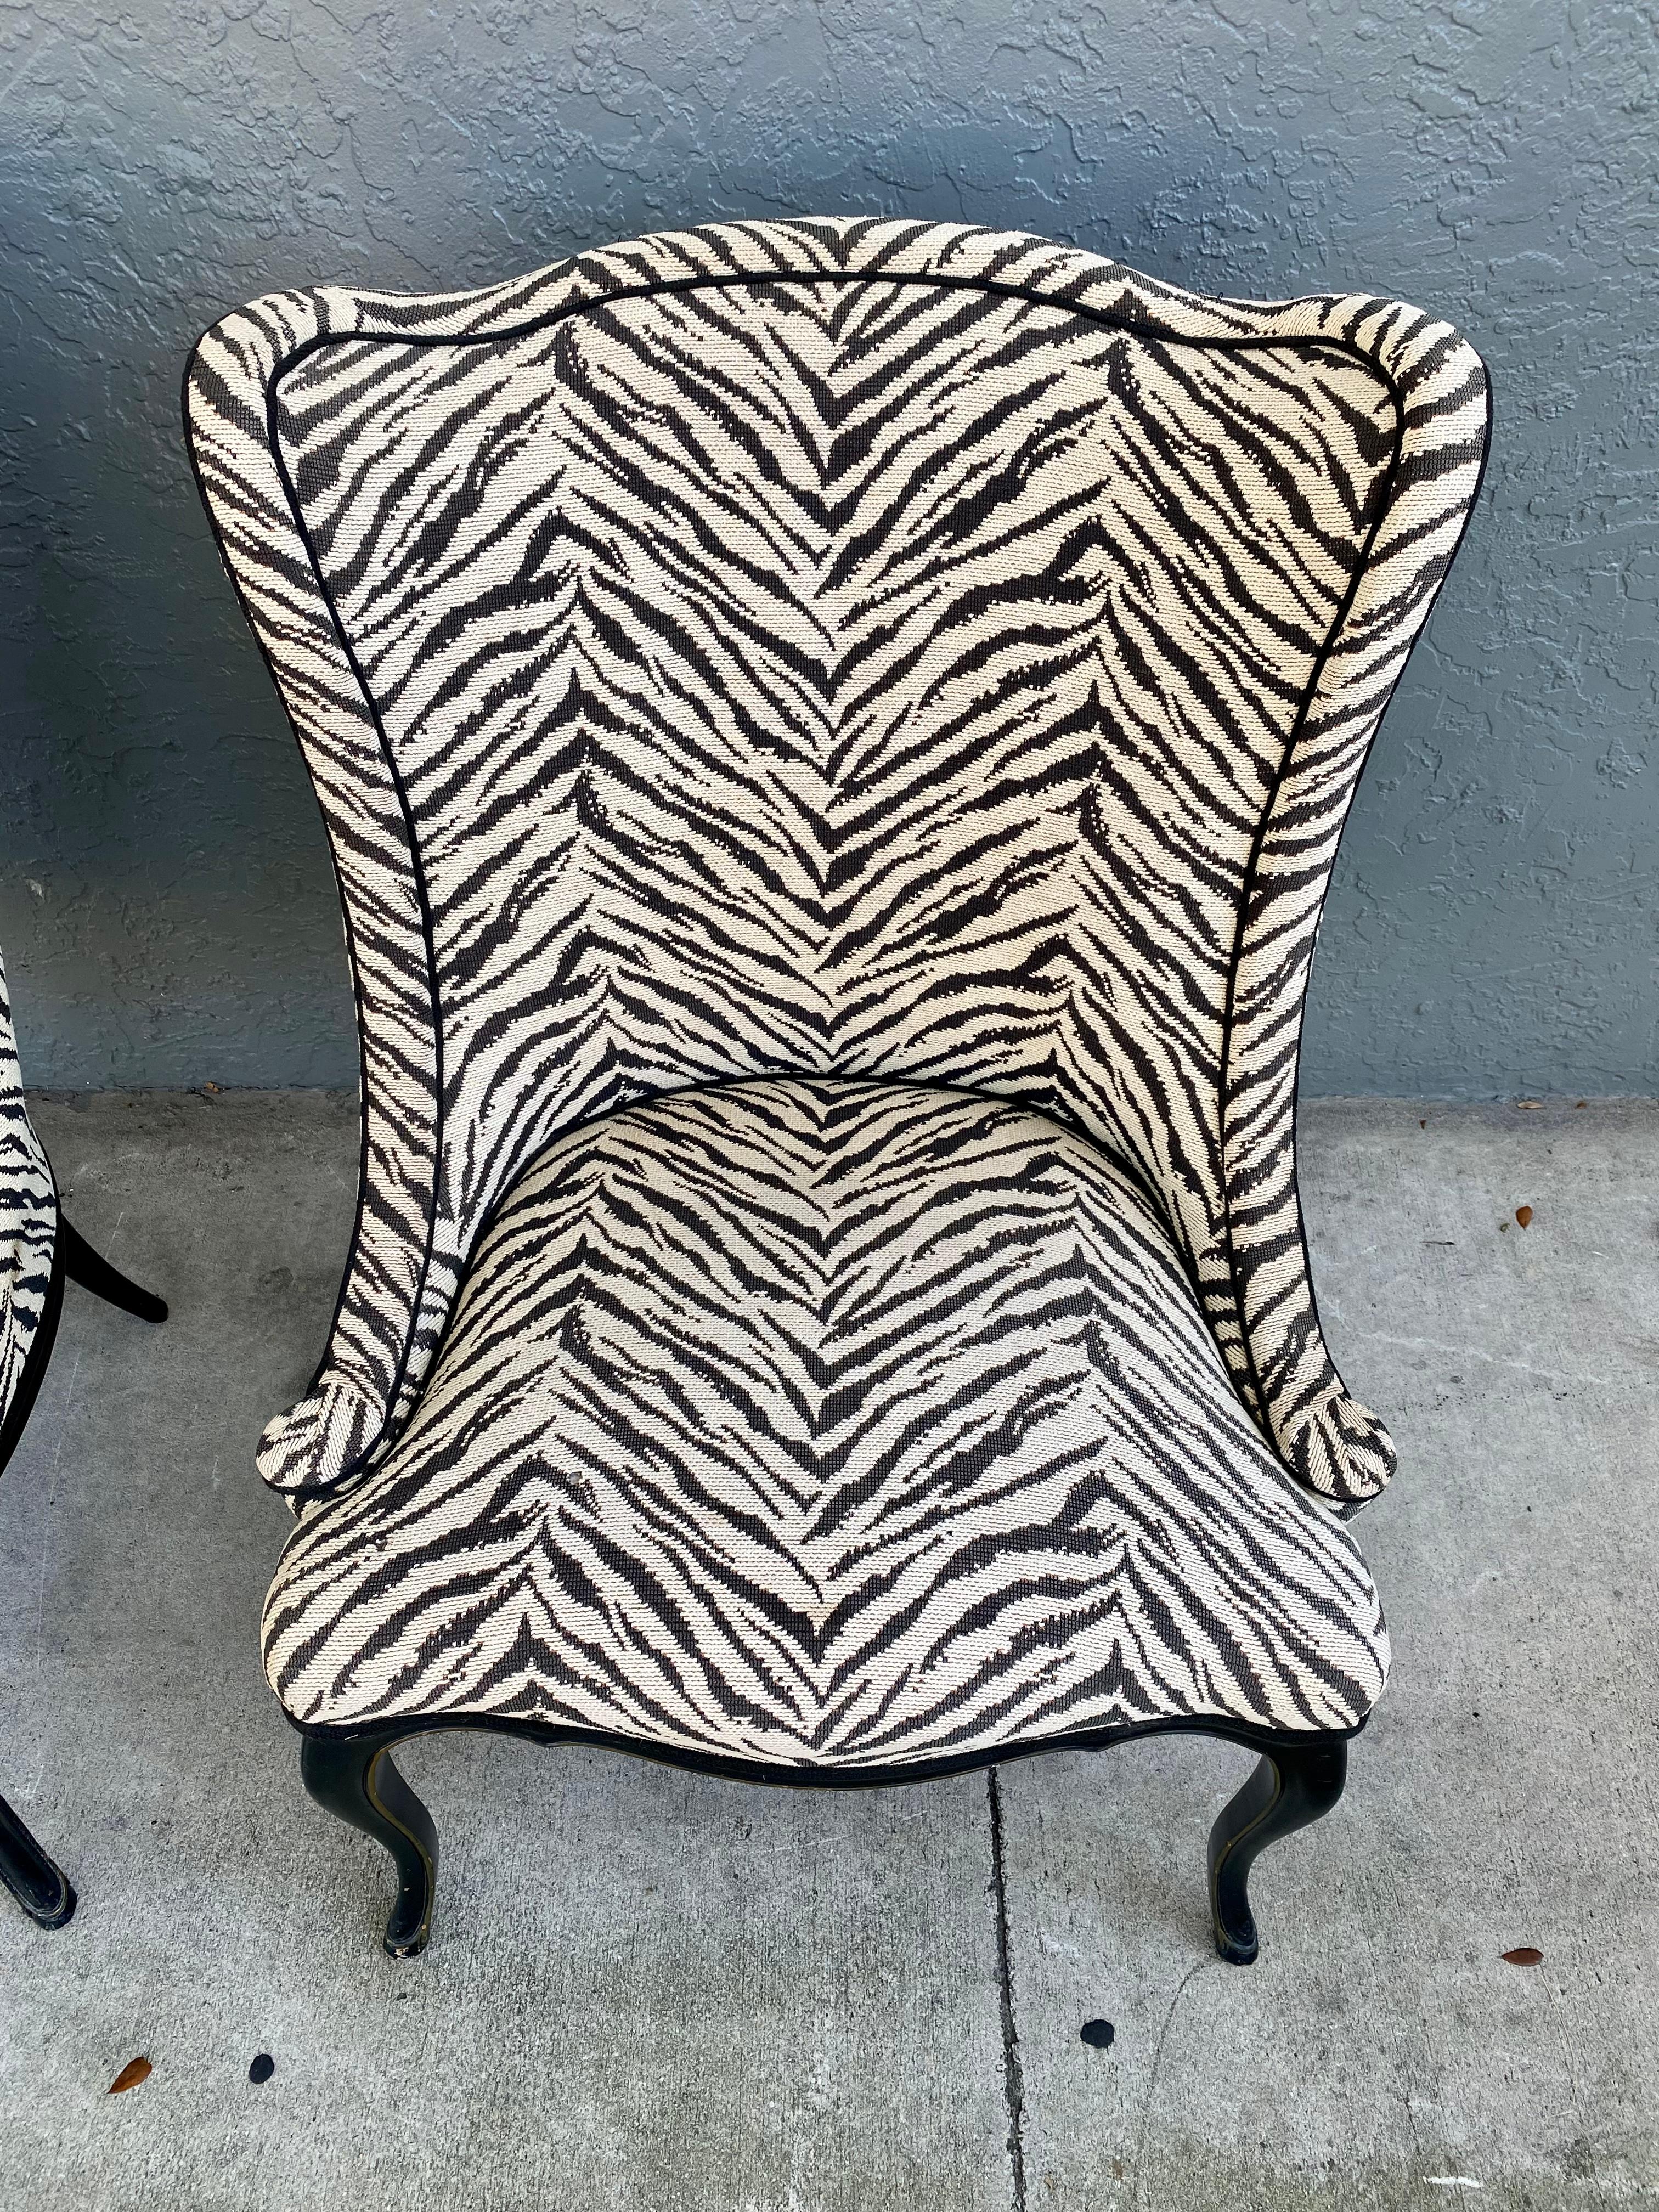 Upholstery Queen Anne Wing Back Slipper Style Scalamandre Zebra Chairs, Set of 2 For Sale